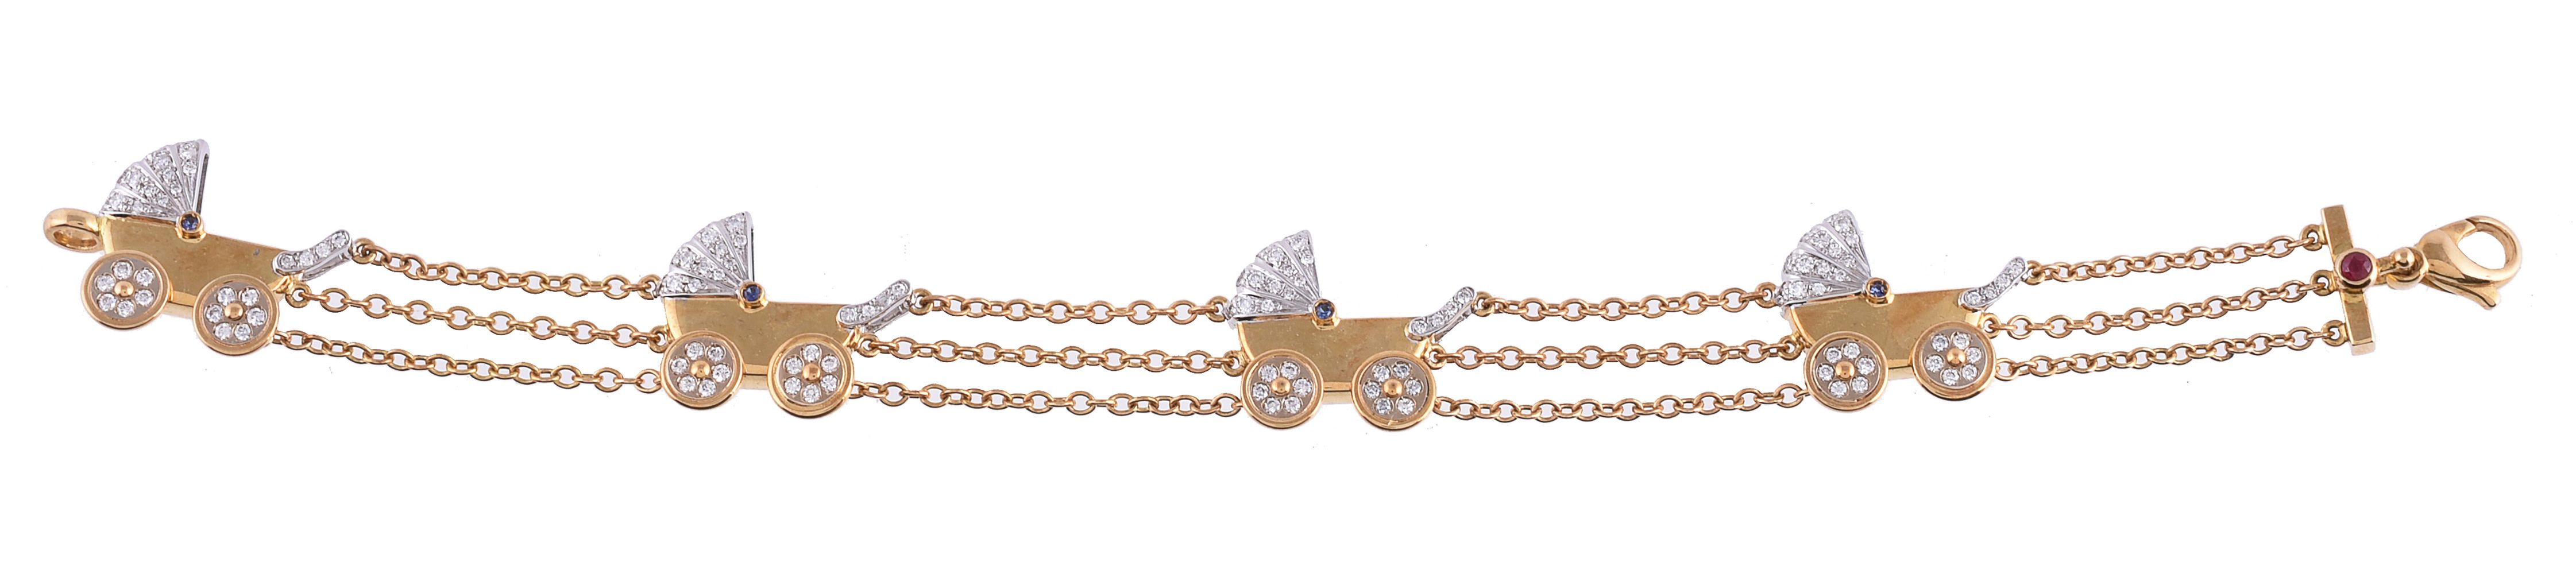 A diamond and sapphire baby carriage bracelet